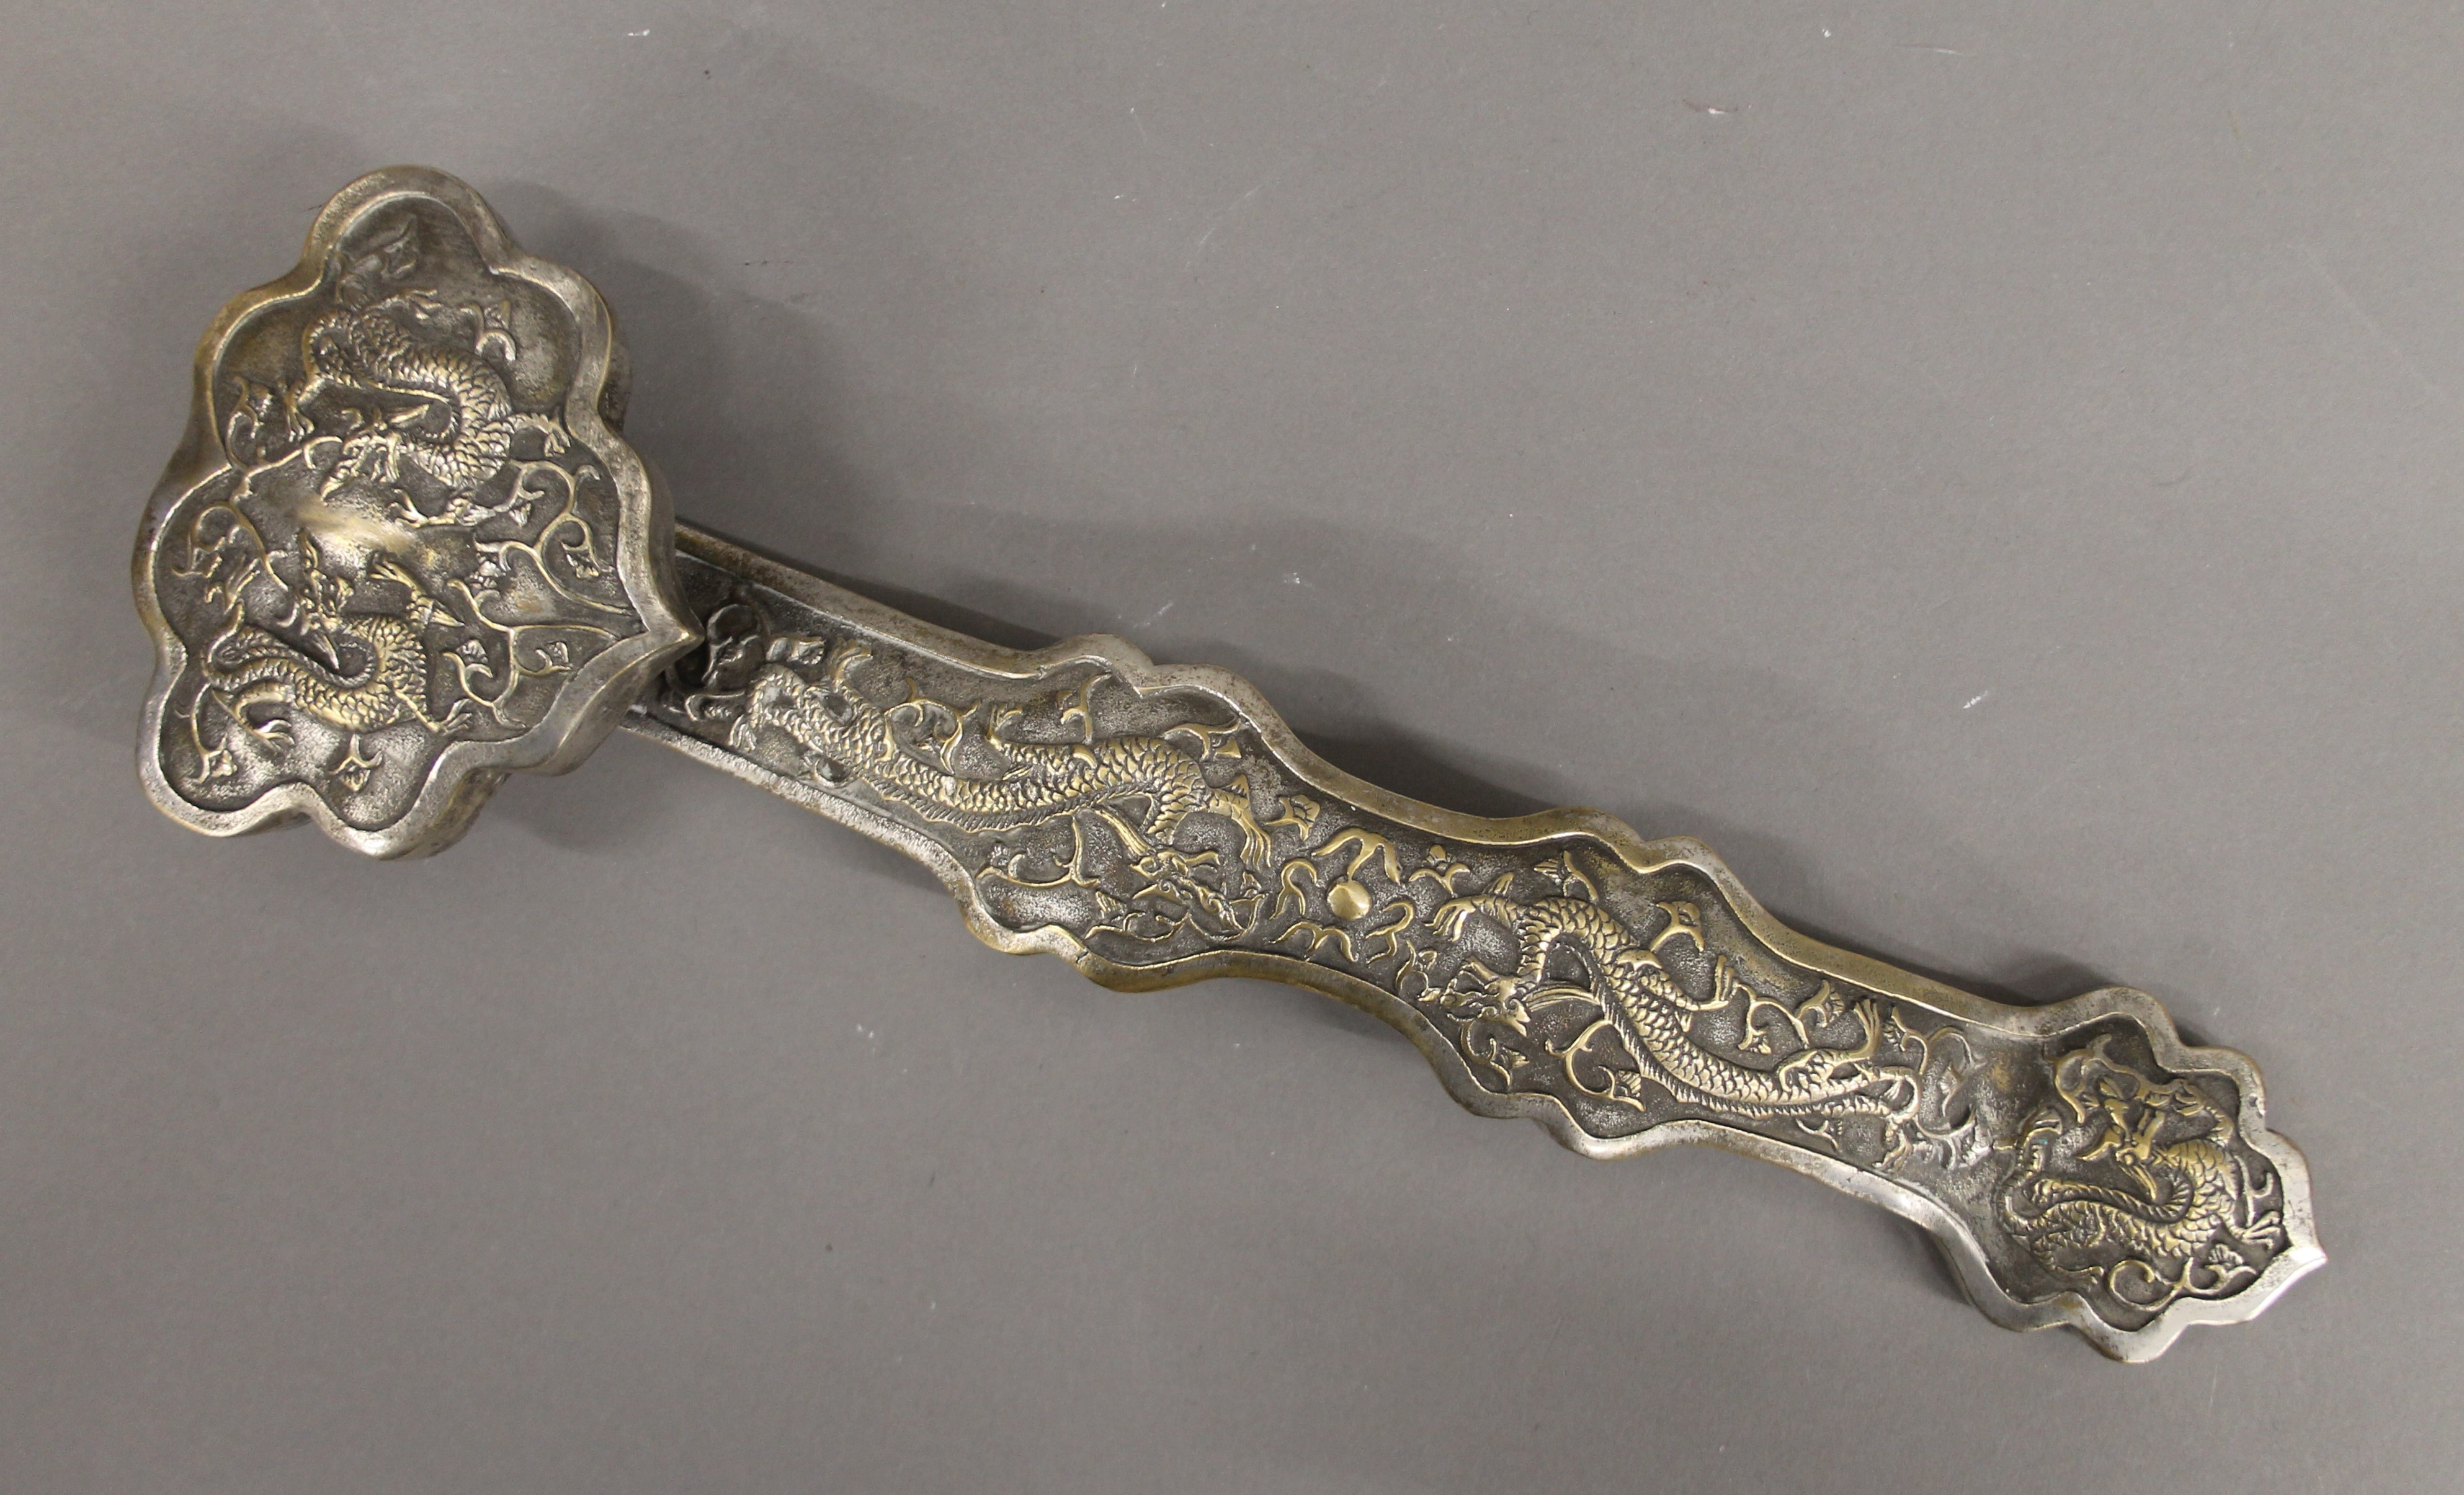 A Chinese silvered bronze ruyi sceptre. 35.5 cm long. - Image 3 of 4